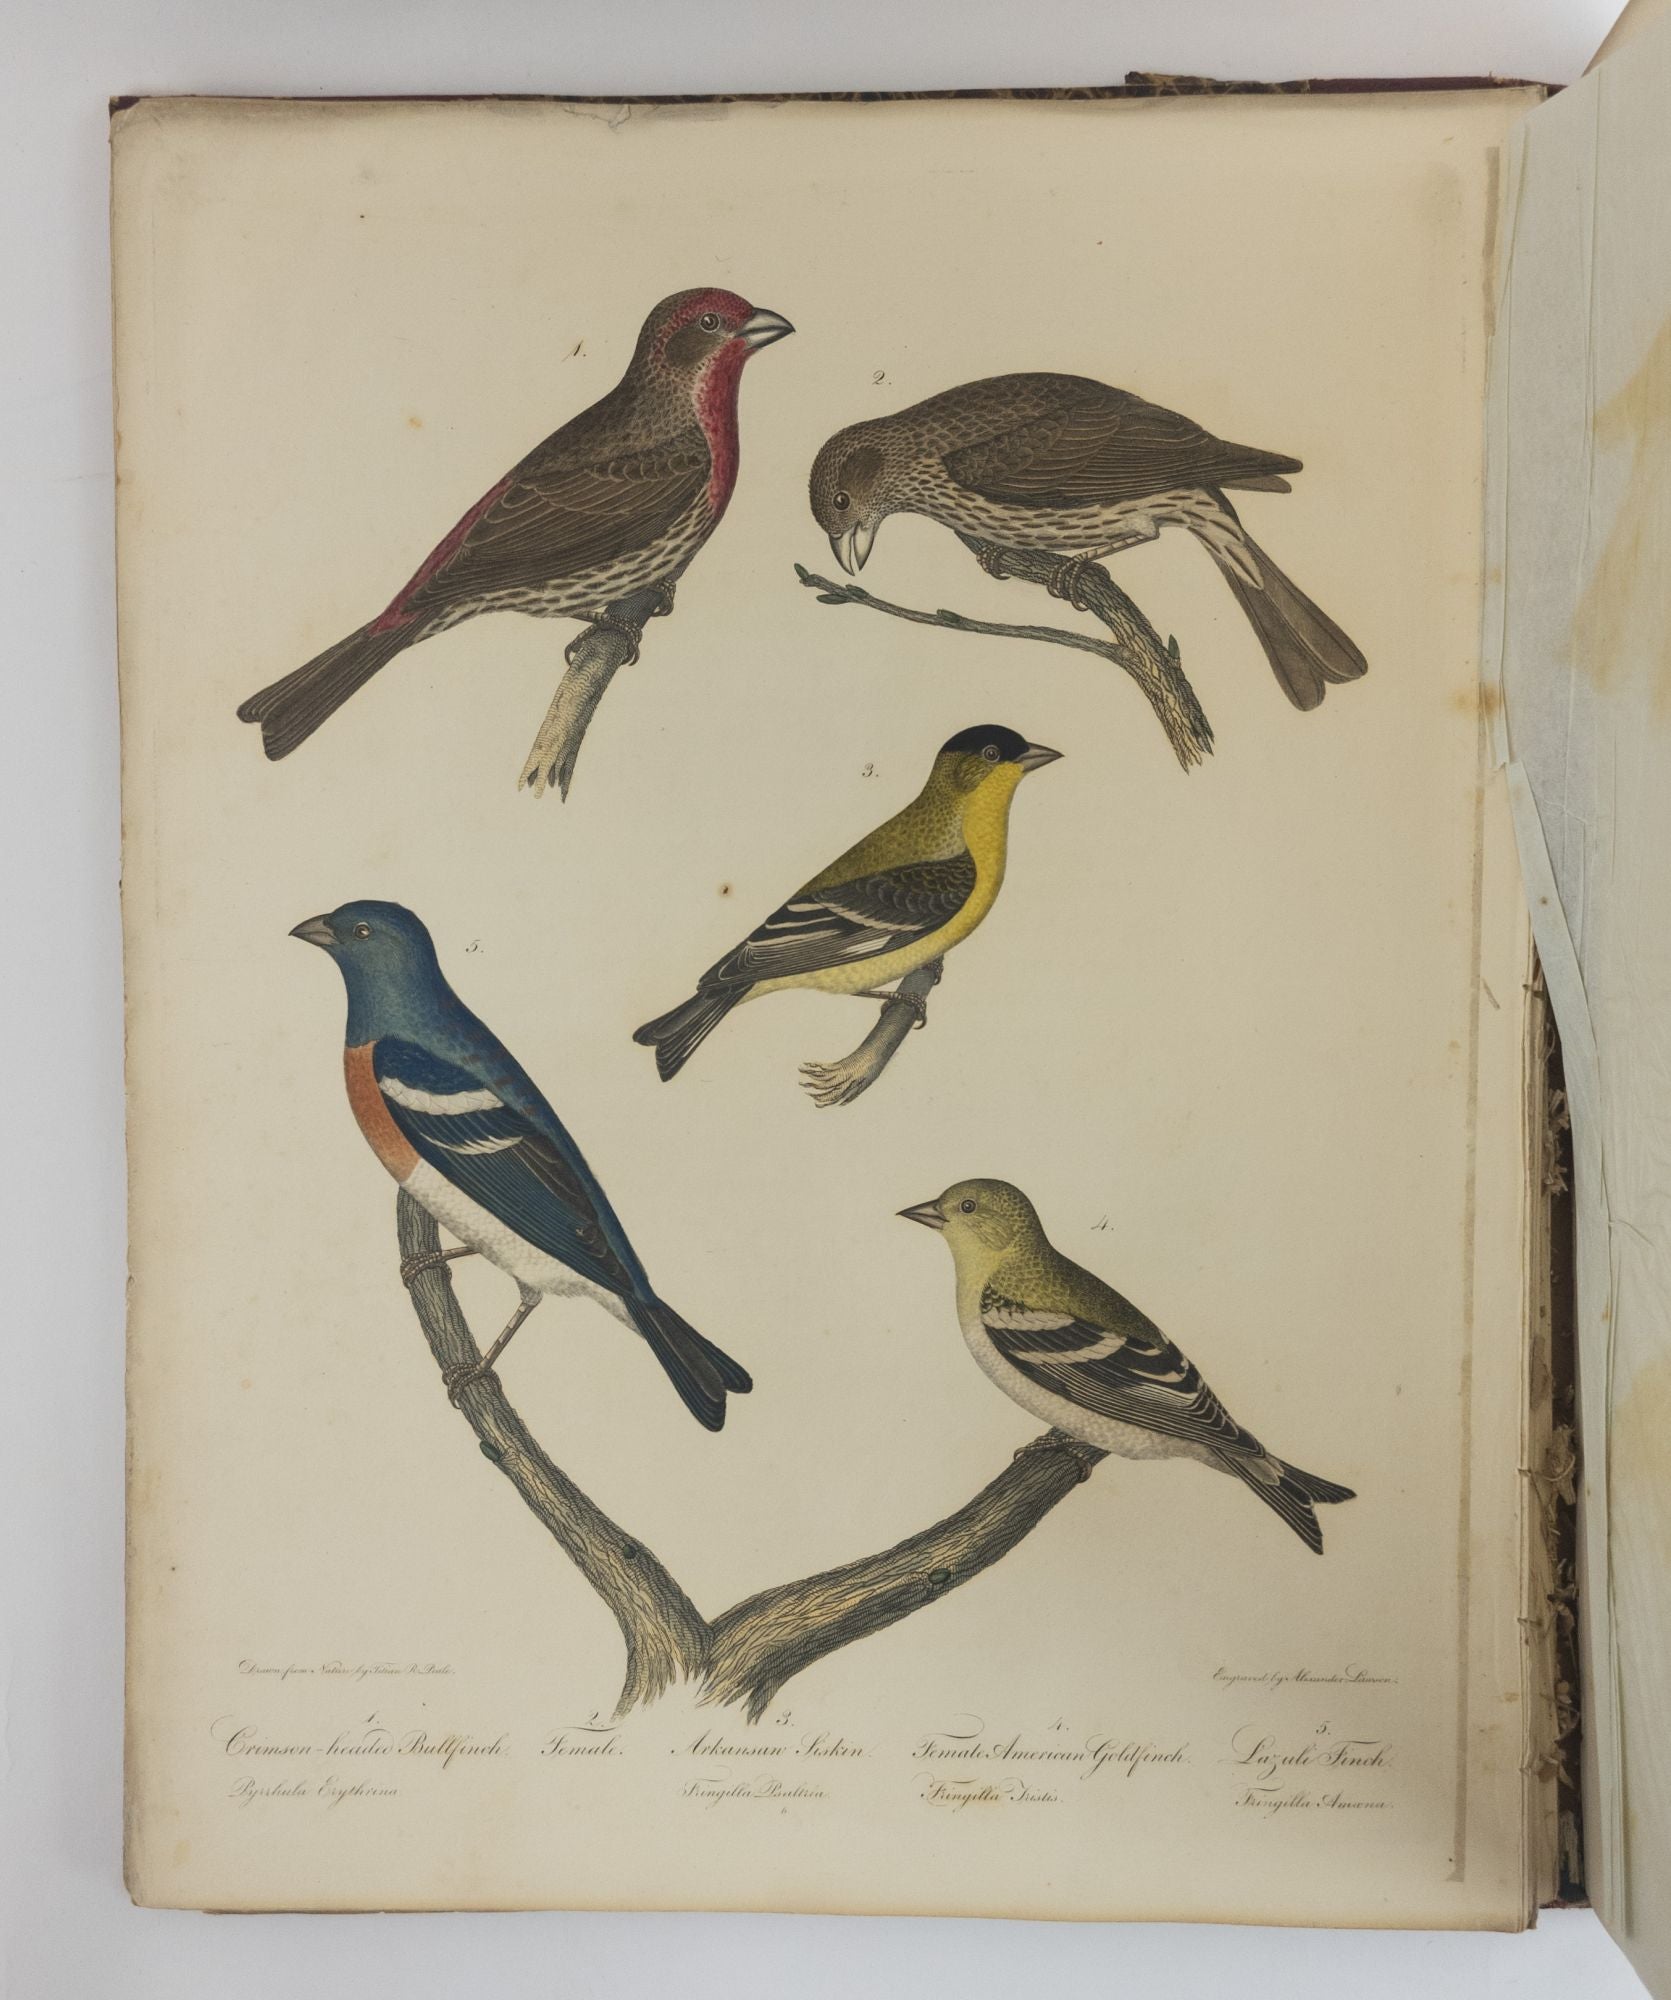 Product Image for AMERICAN ORNITHOLOGY; OR, THE NATURAL HISTORY OF THE BIRDS OF THE UNITED STATES [Four volumes]